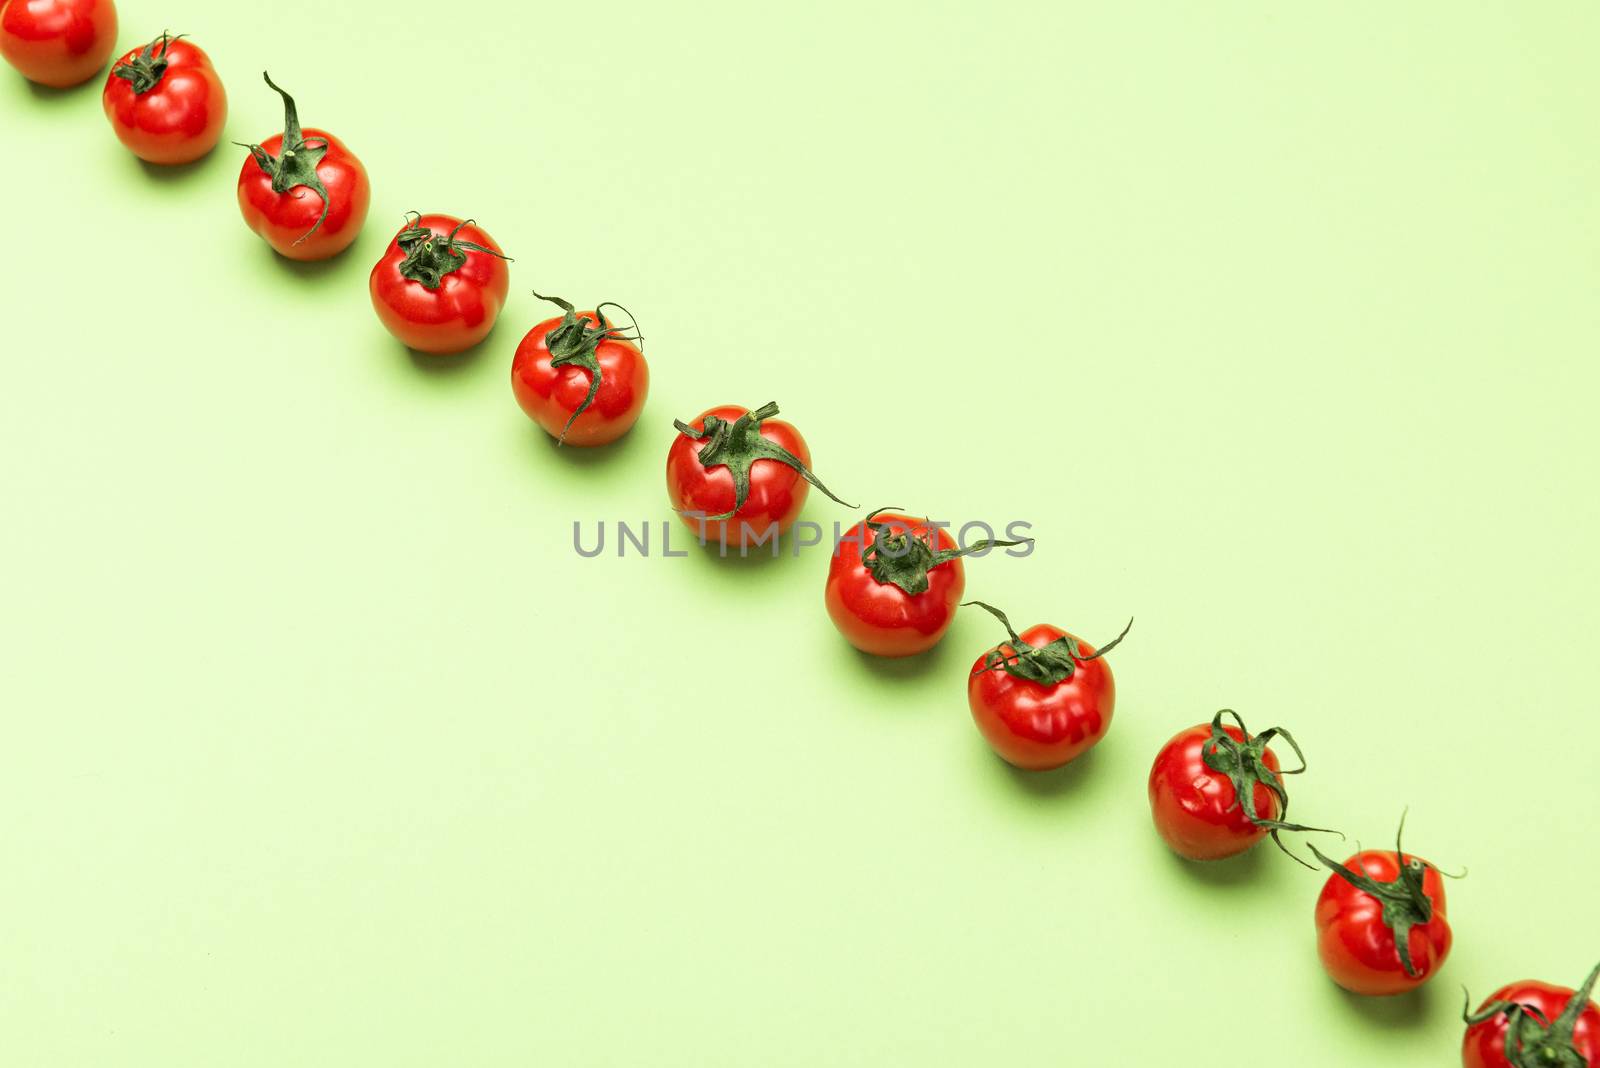 Vibrant Red Tomatoes on Green Background, Flat Lay Vegetable Pattern. Top View.